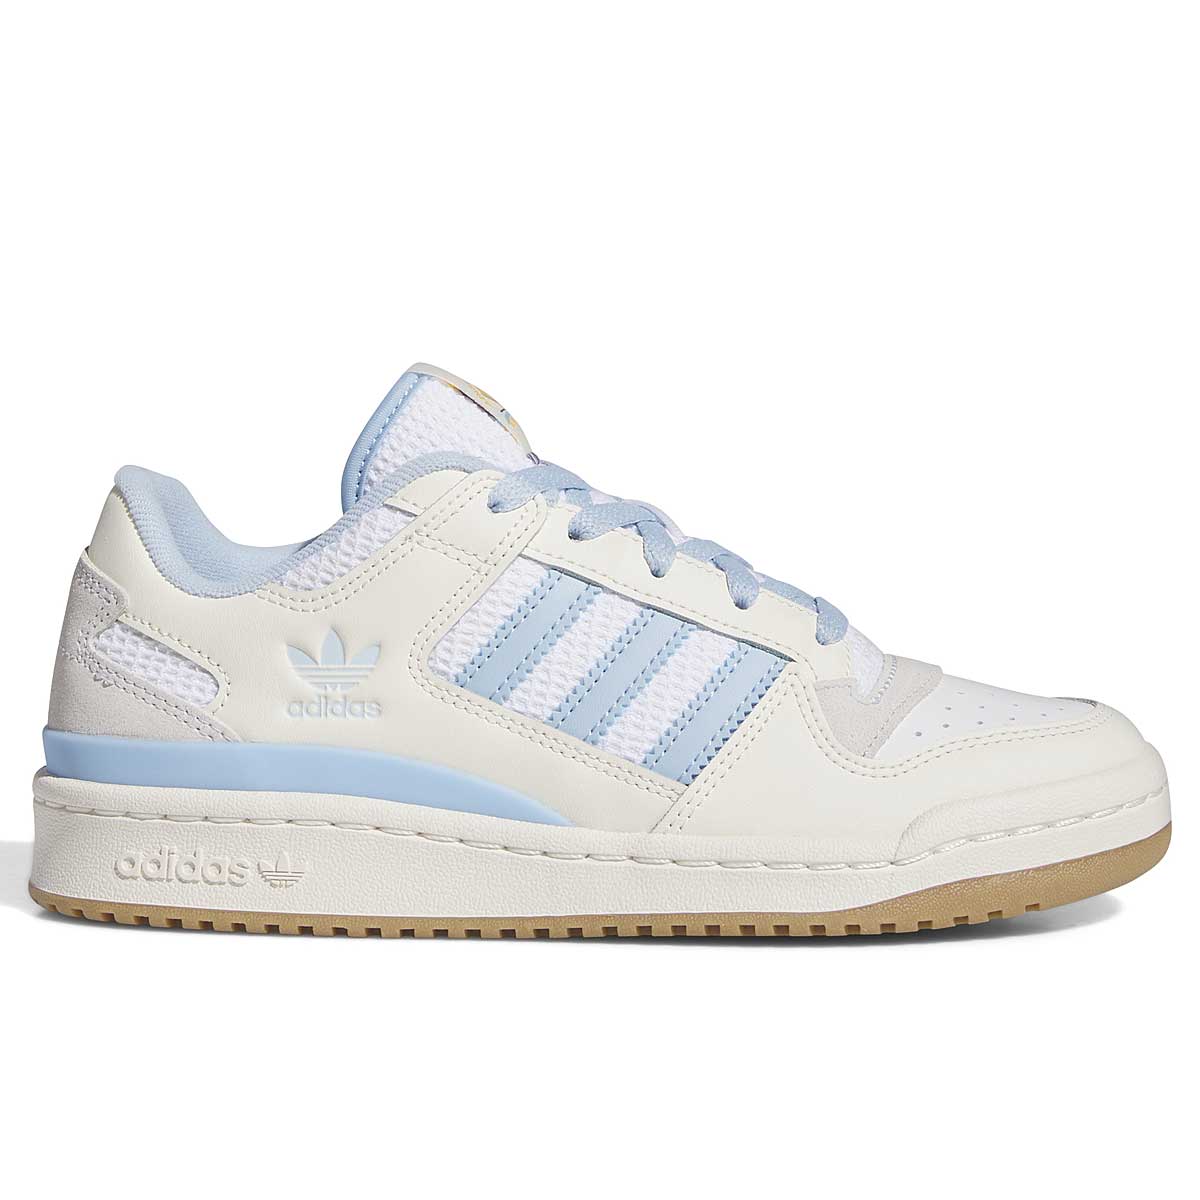 Image of Adidas Forum Low Cl W, Cwhite/clesky/ftwwht